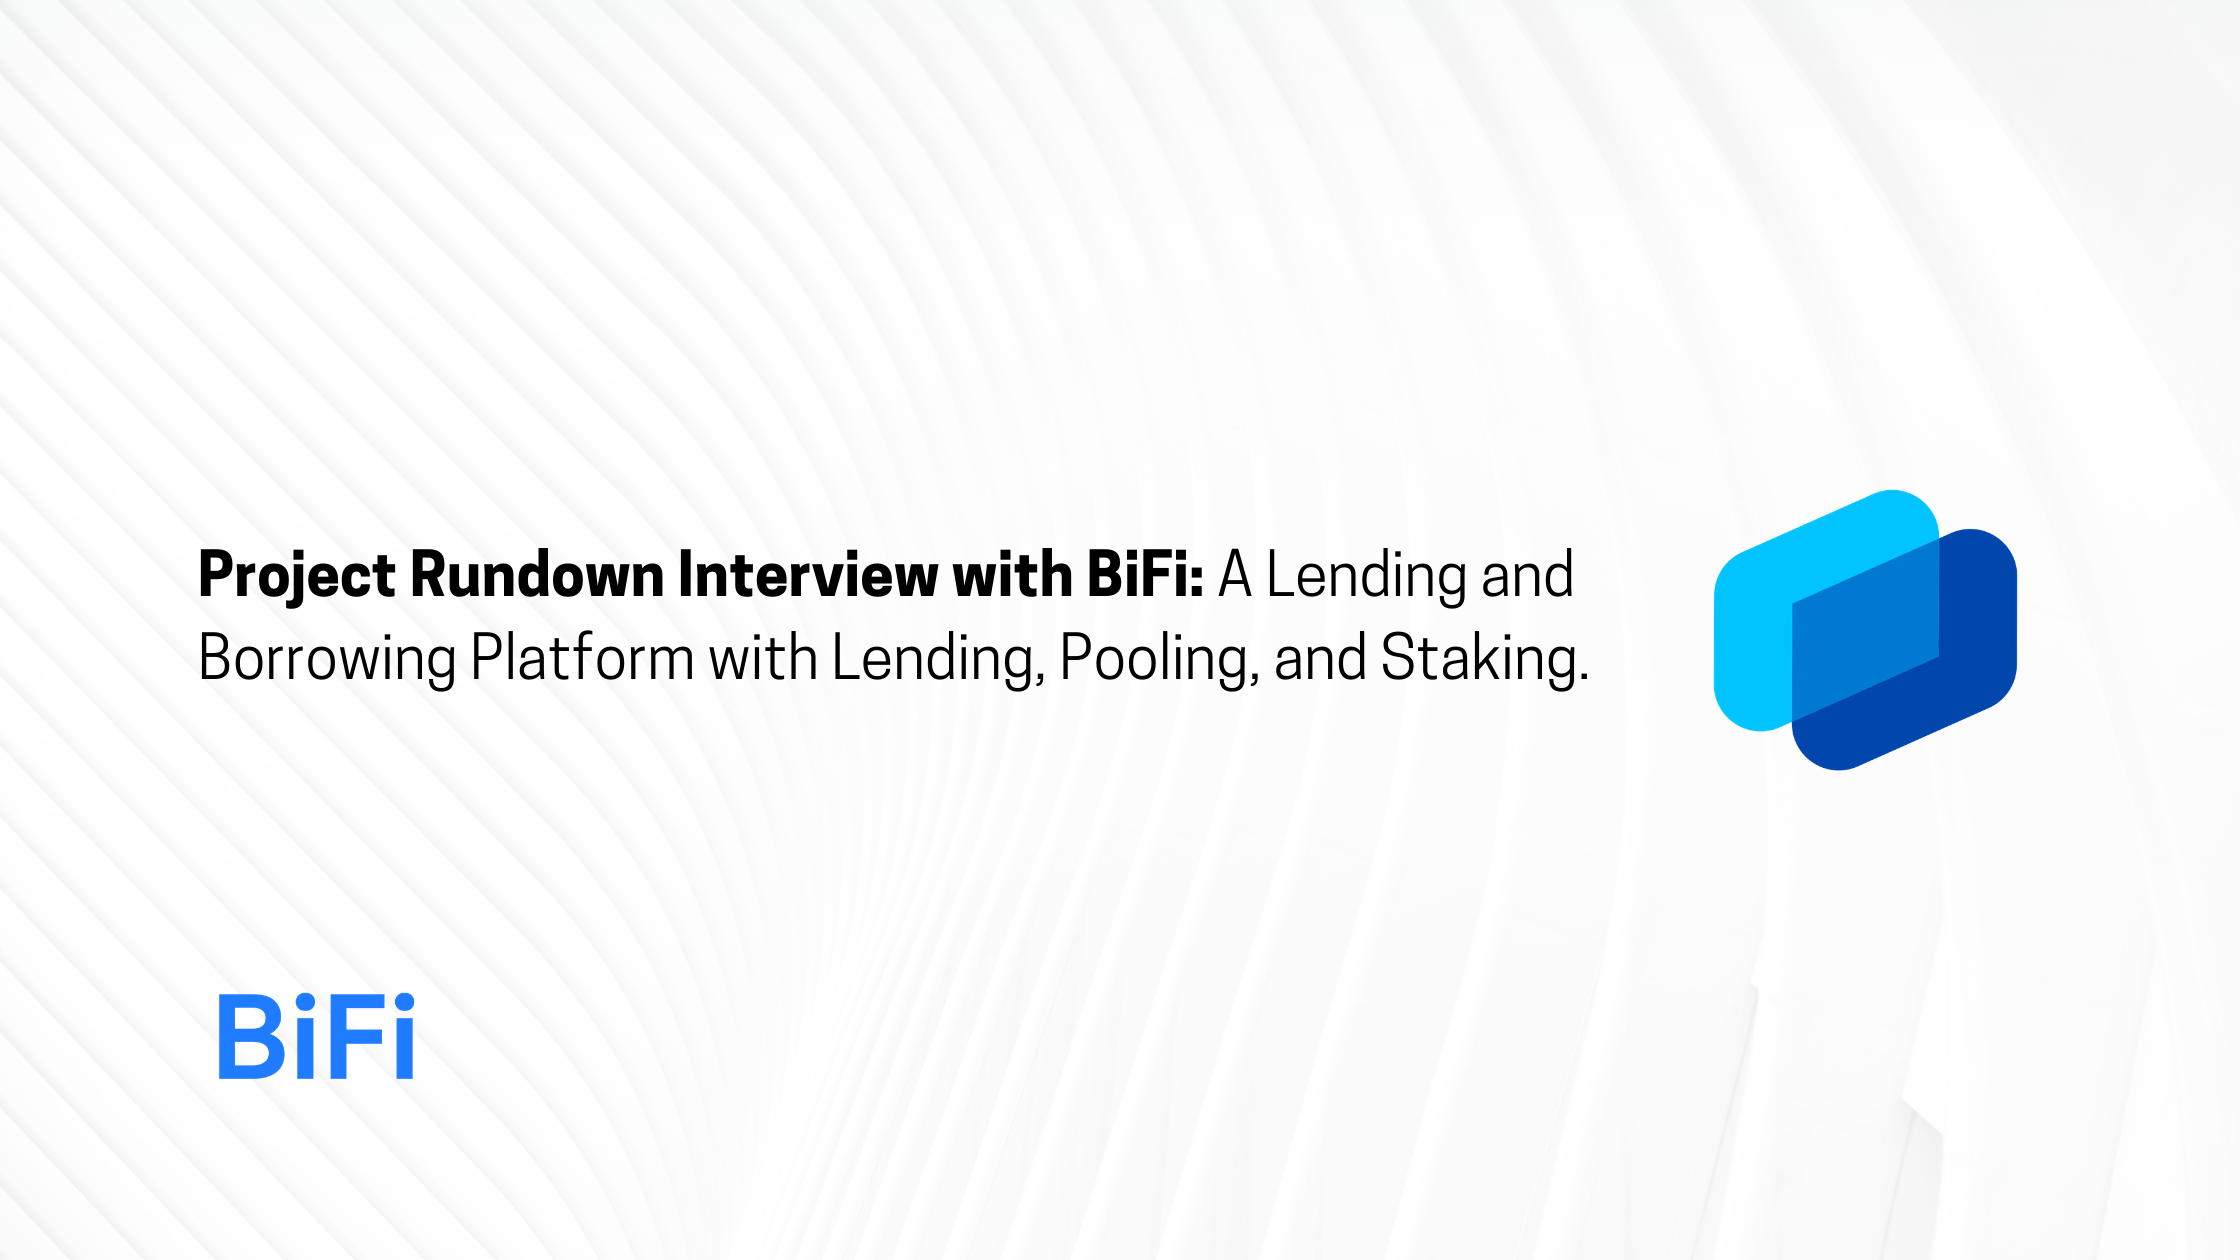 Project Rundown Interview with BiFi: A Lending and Borrowing Platform with Lending, Pooling, and Staking.